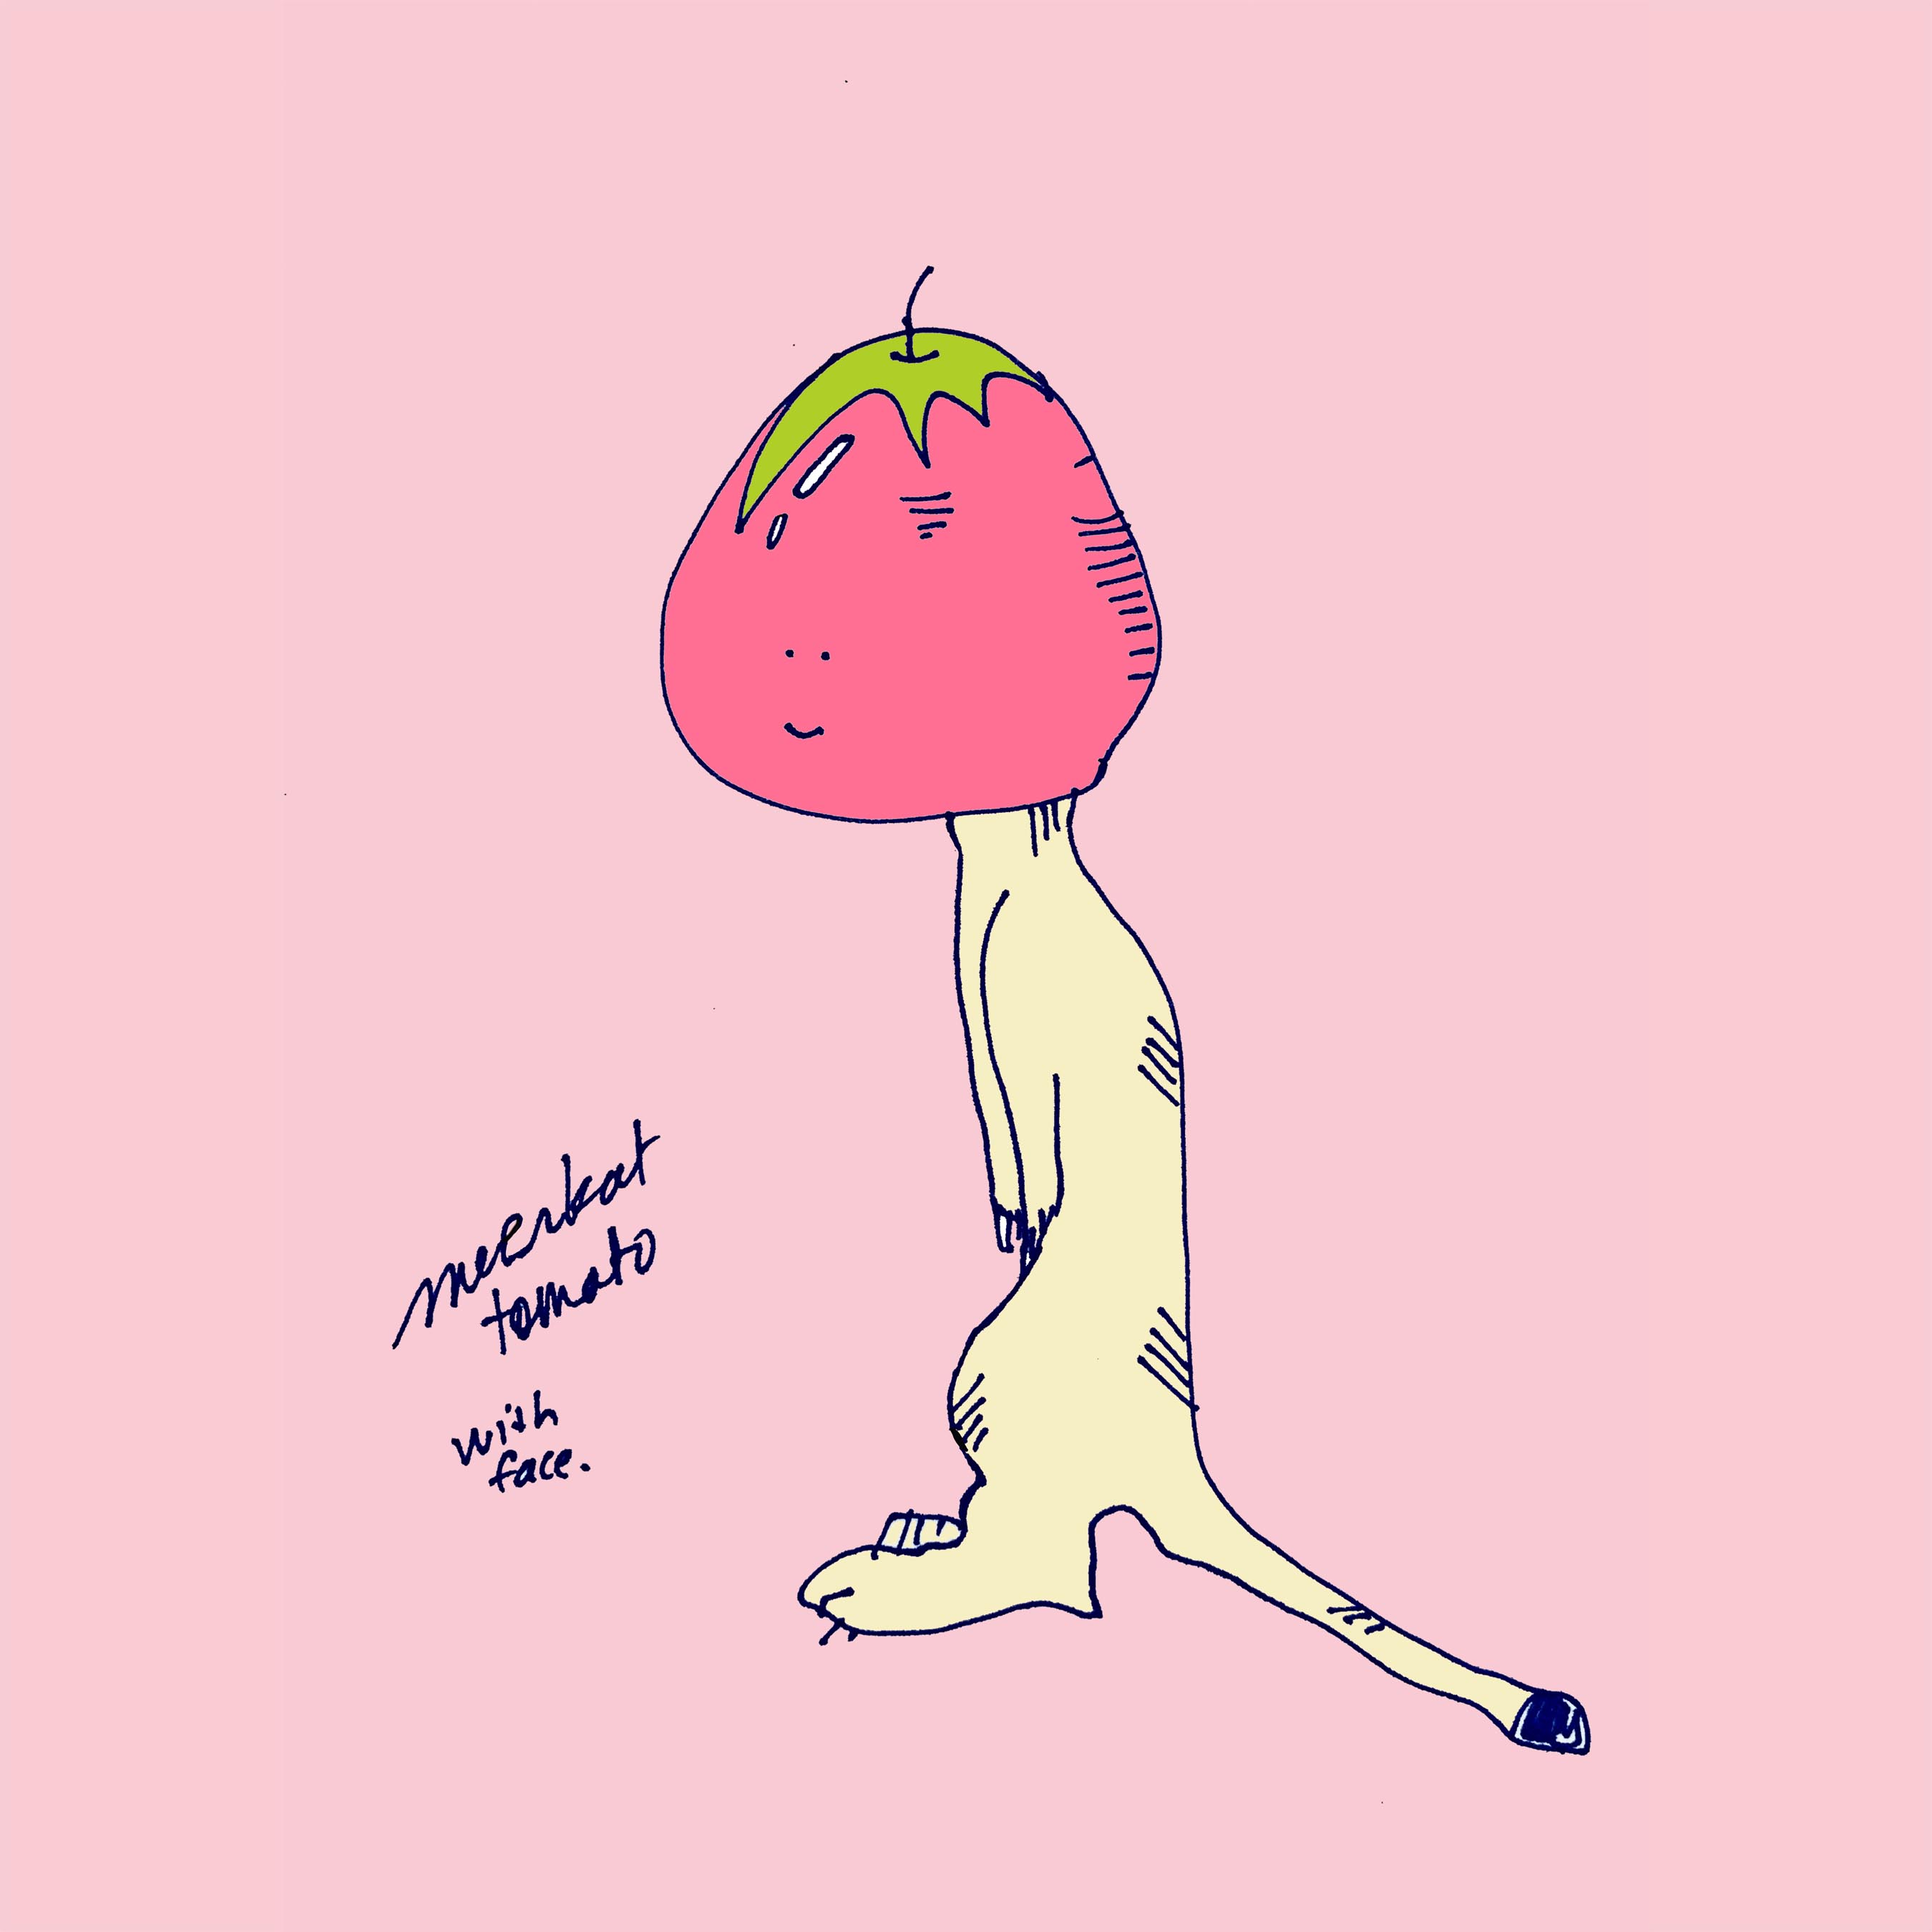 art every day number 616 illustration meerkat strawberry tomato drawing